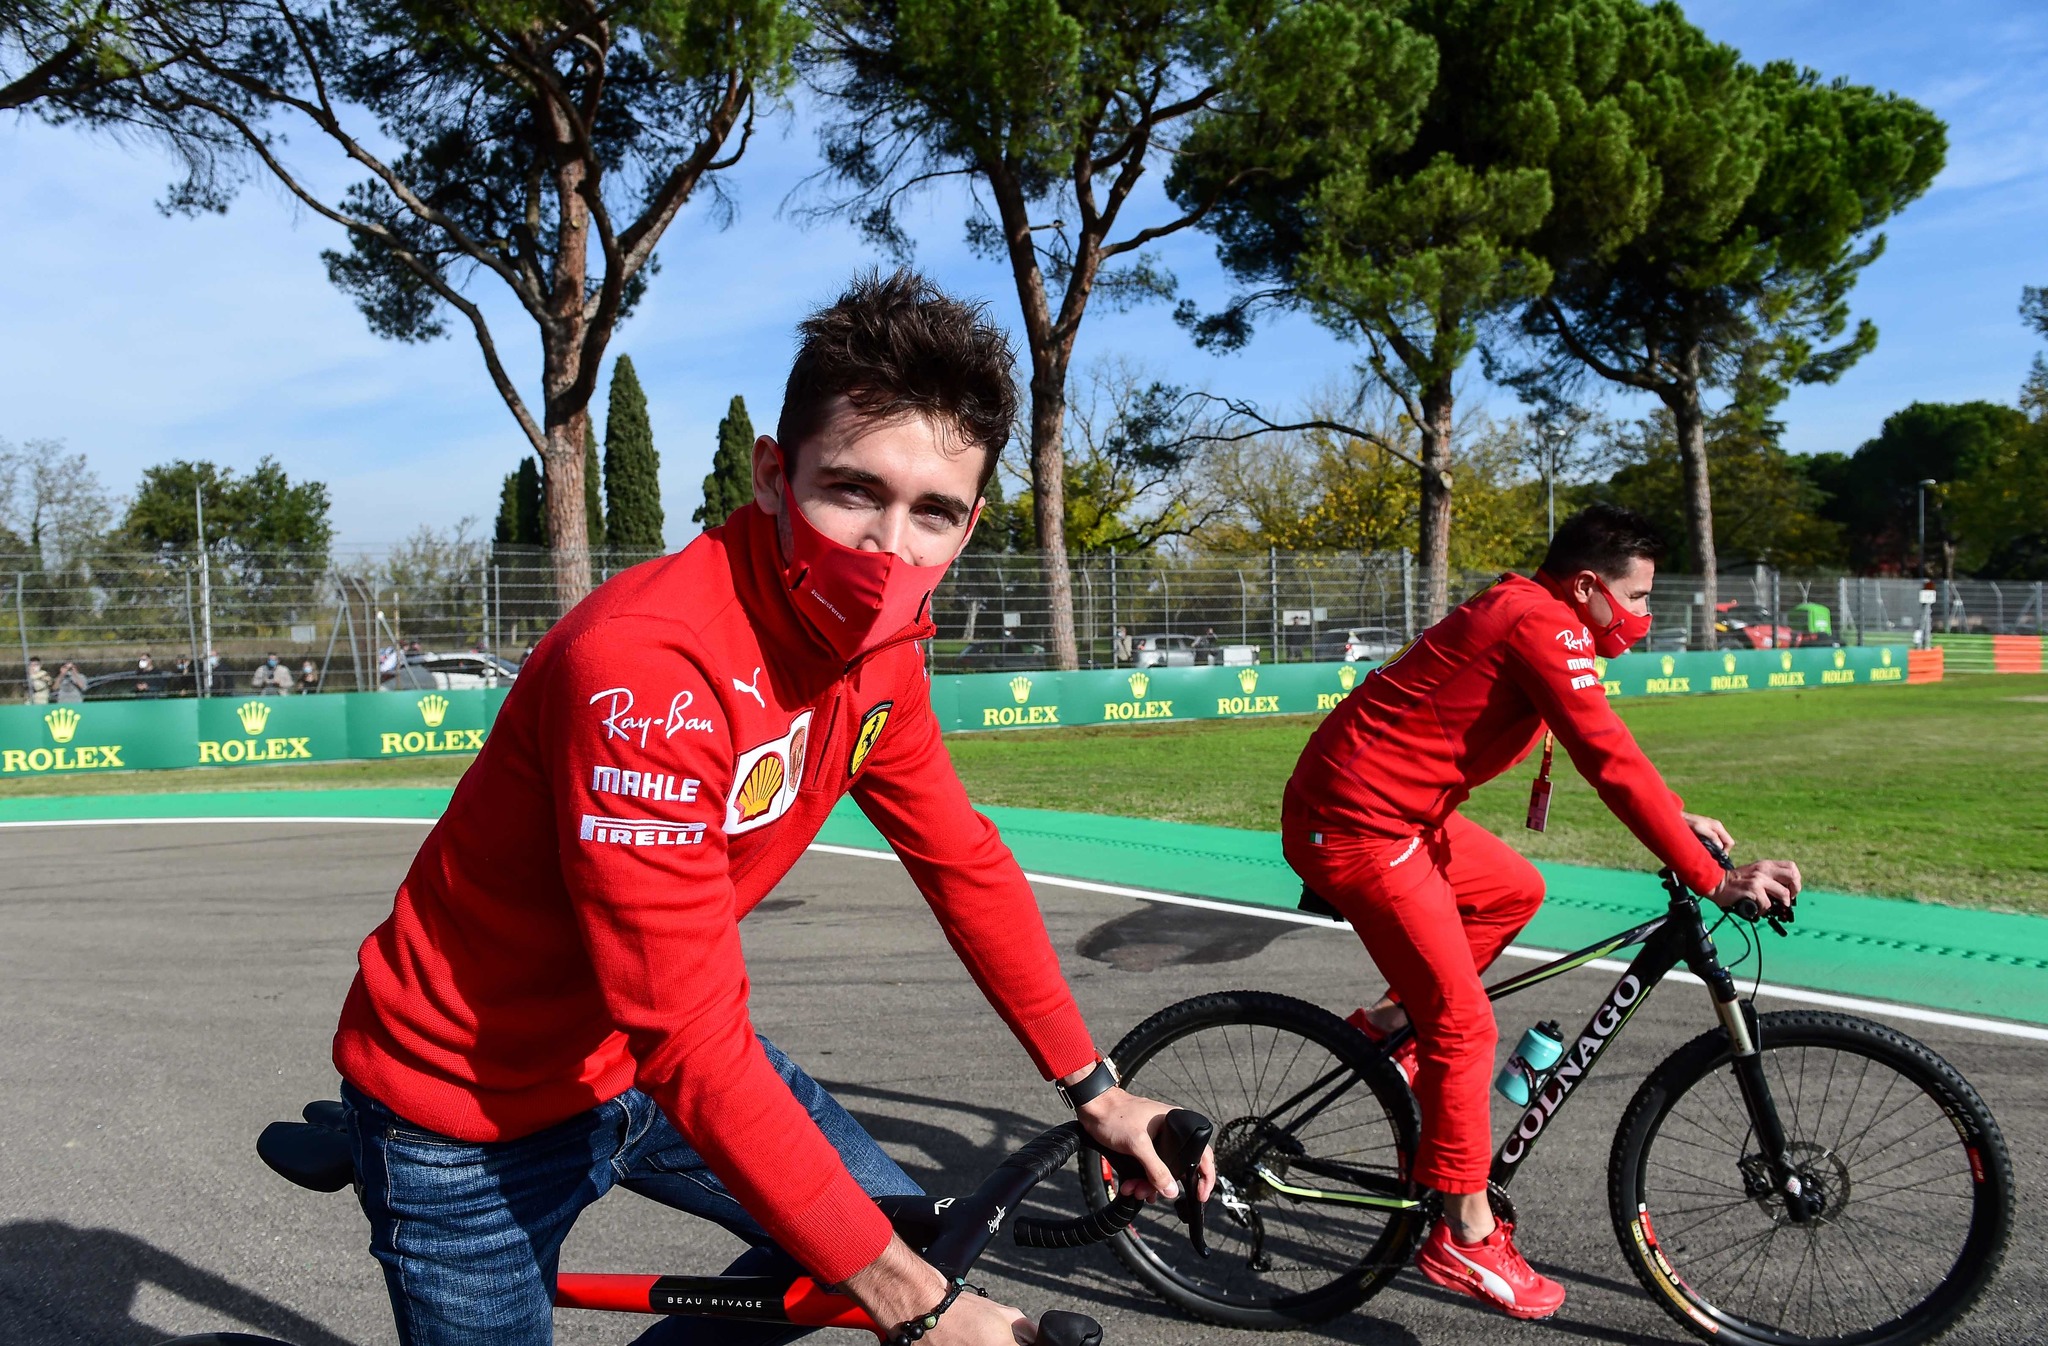 Ferrari's Monegasque driver Charles lt;HIT gt;Leclerc lt;/HIT gt; (L) rides a bike as he inspects the Autodromo Internazionale Enzo e Dino Ferrari race track in Imola, Italy, on October 30, 2020, two days ahead of the Formula One Emilia Romagna Grand Prix. (Photo by Miguel MEDINA / AFP)